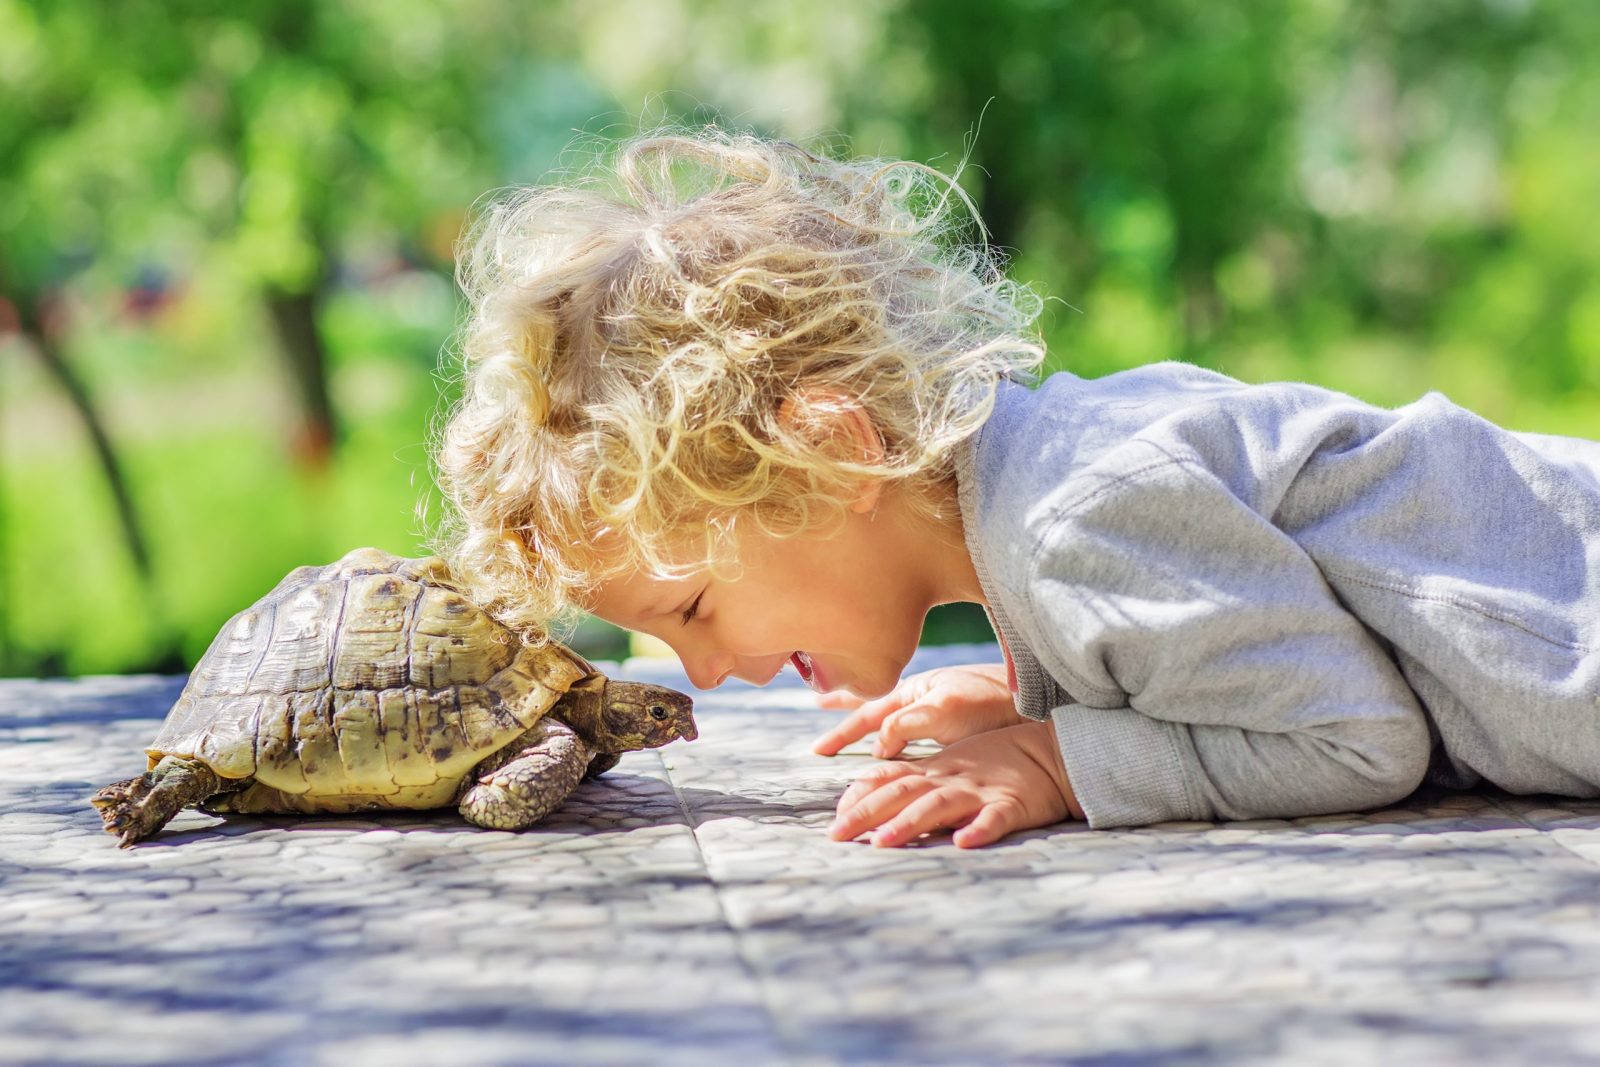 Turtle and boy laying in the street